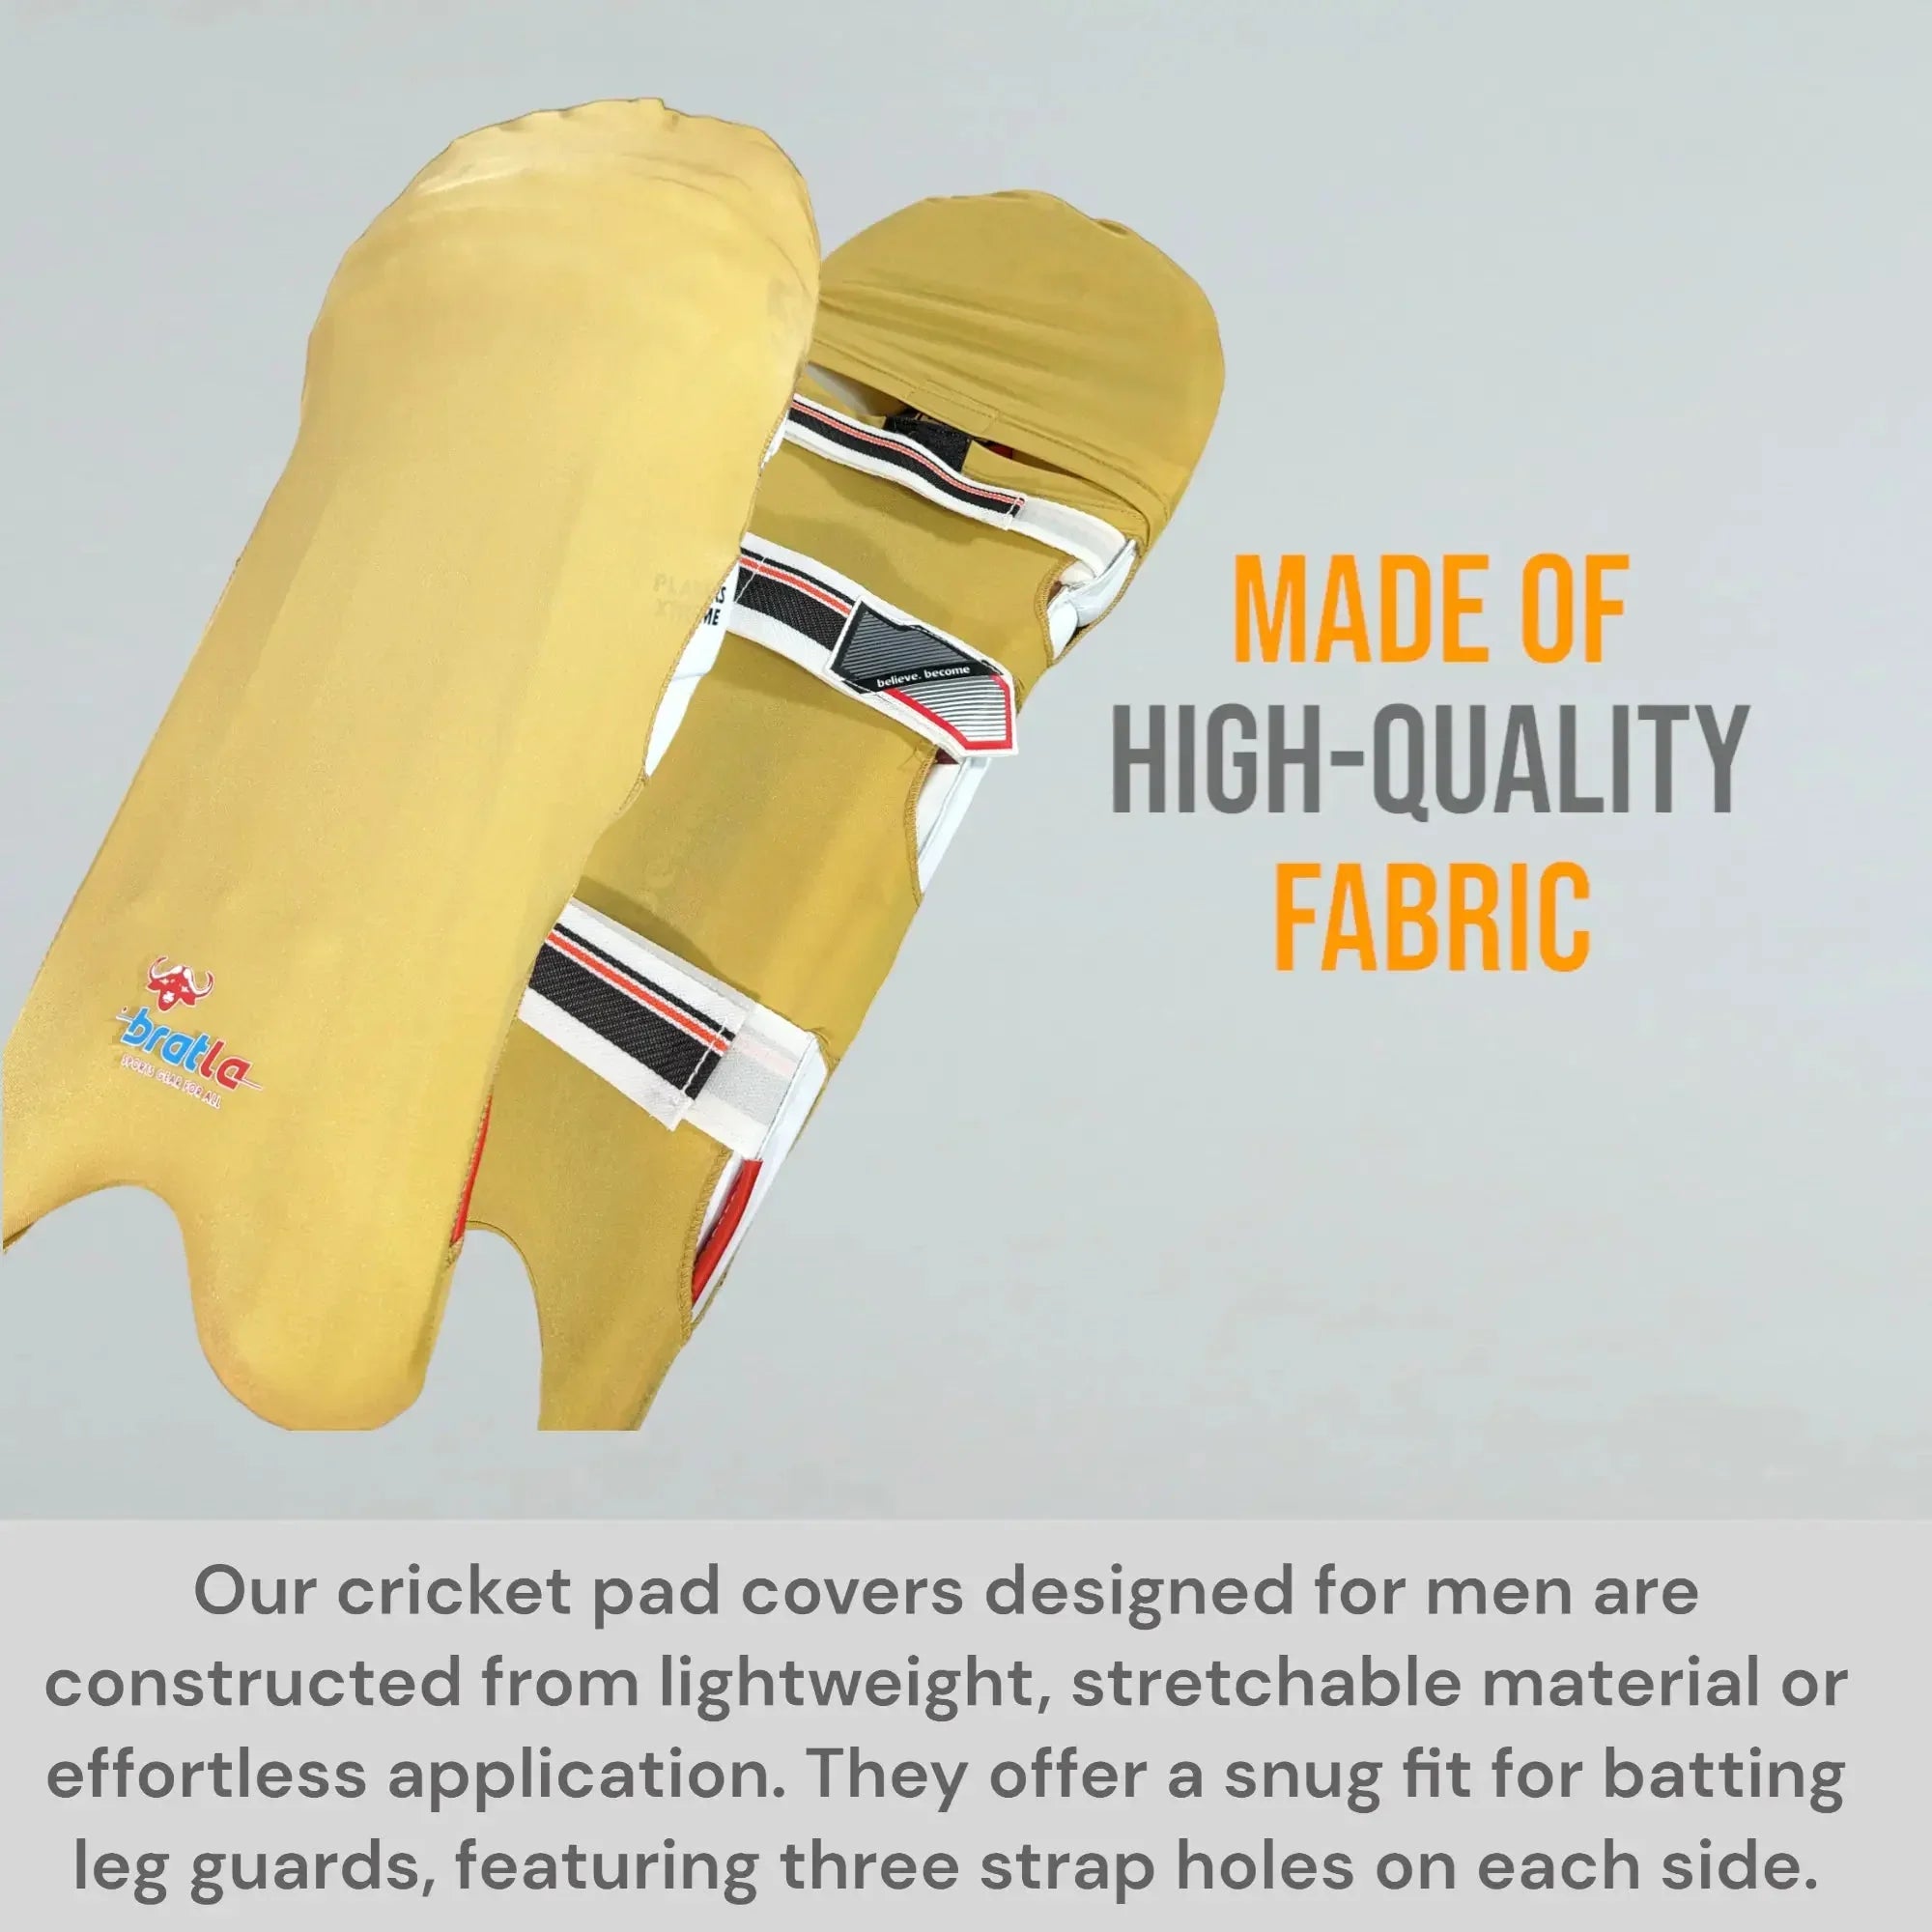 Bratla Cricket Batting Pad Covers Fit Neatly Easily Put On - PADS - BATTING COVER